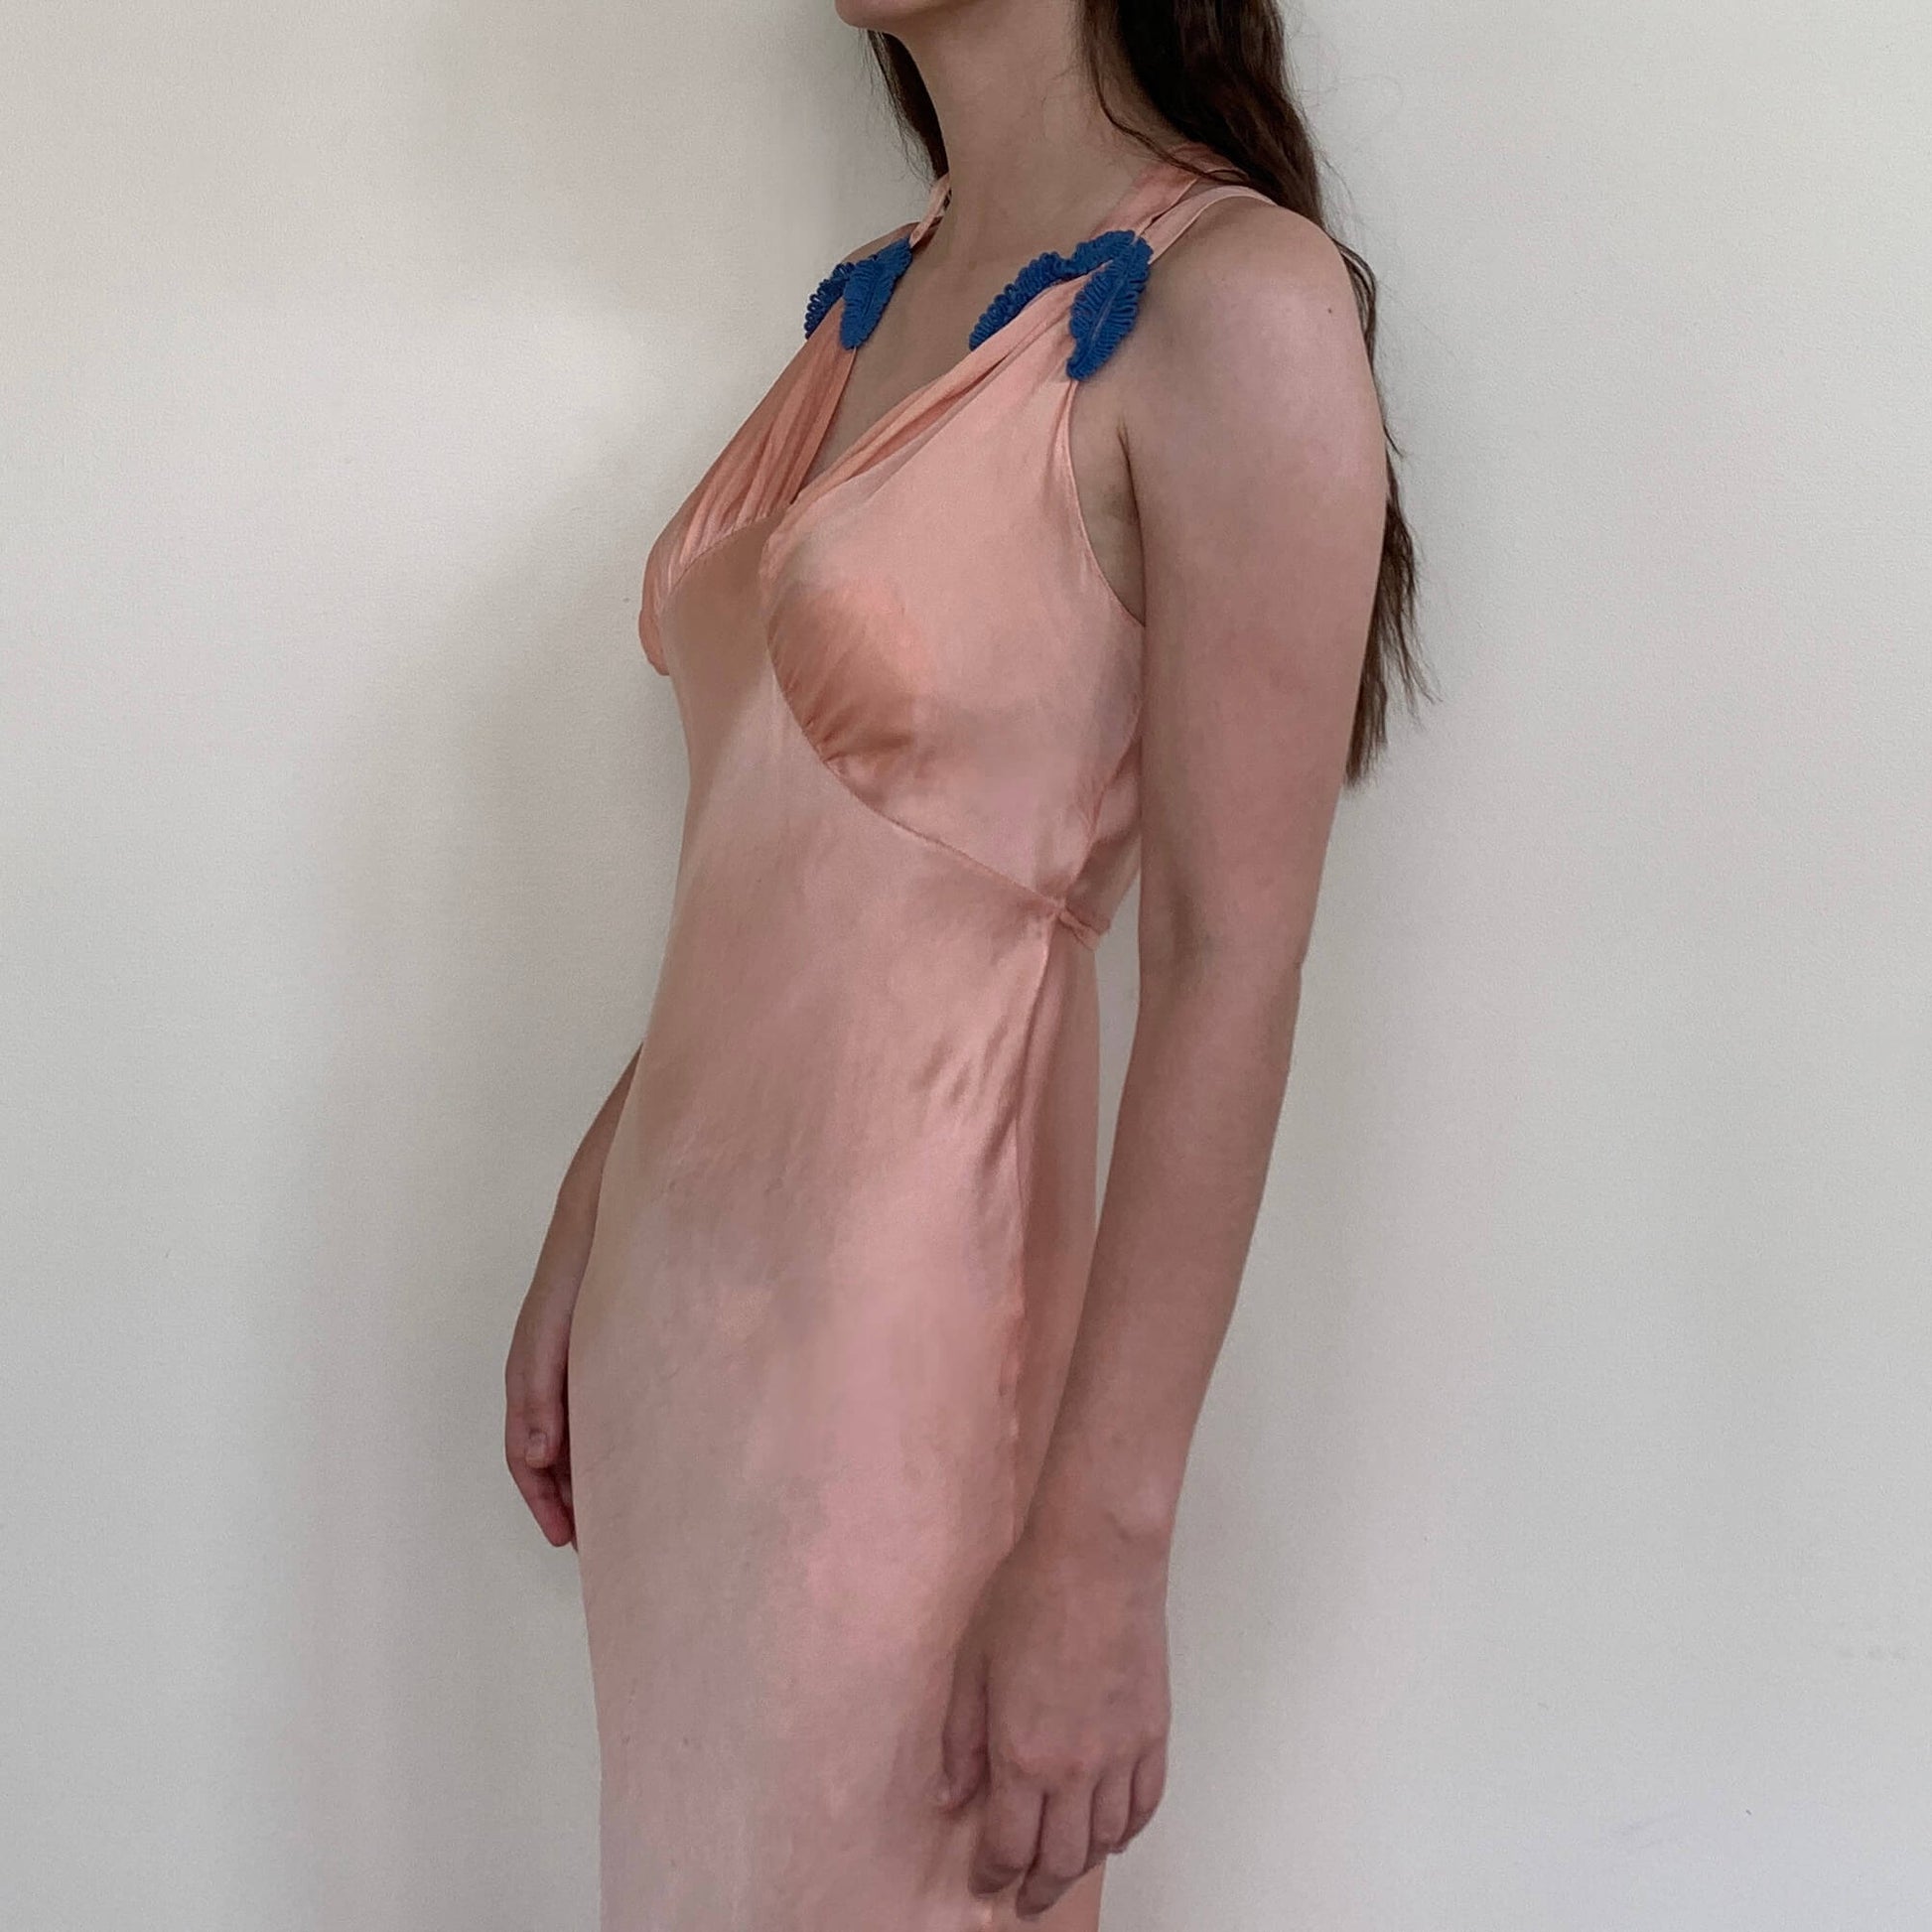 side view of the pink nightgown worn on a model